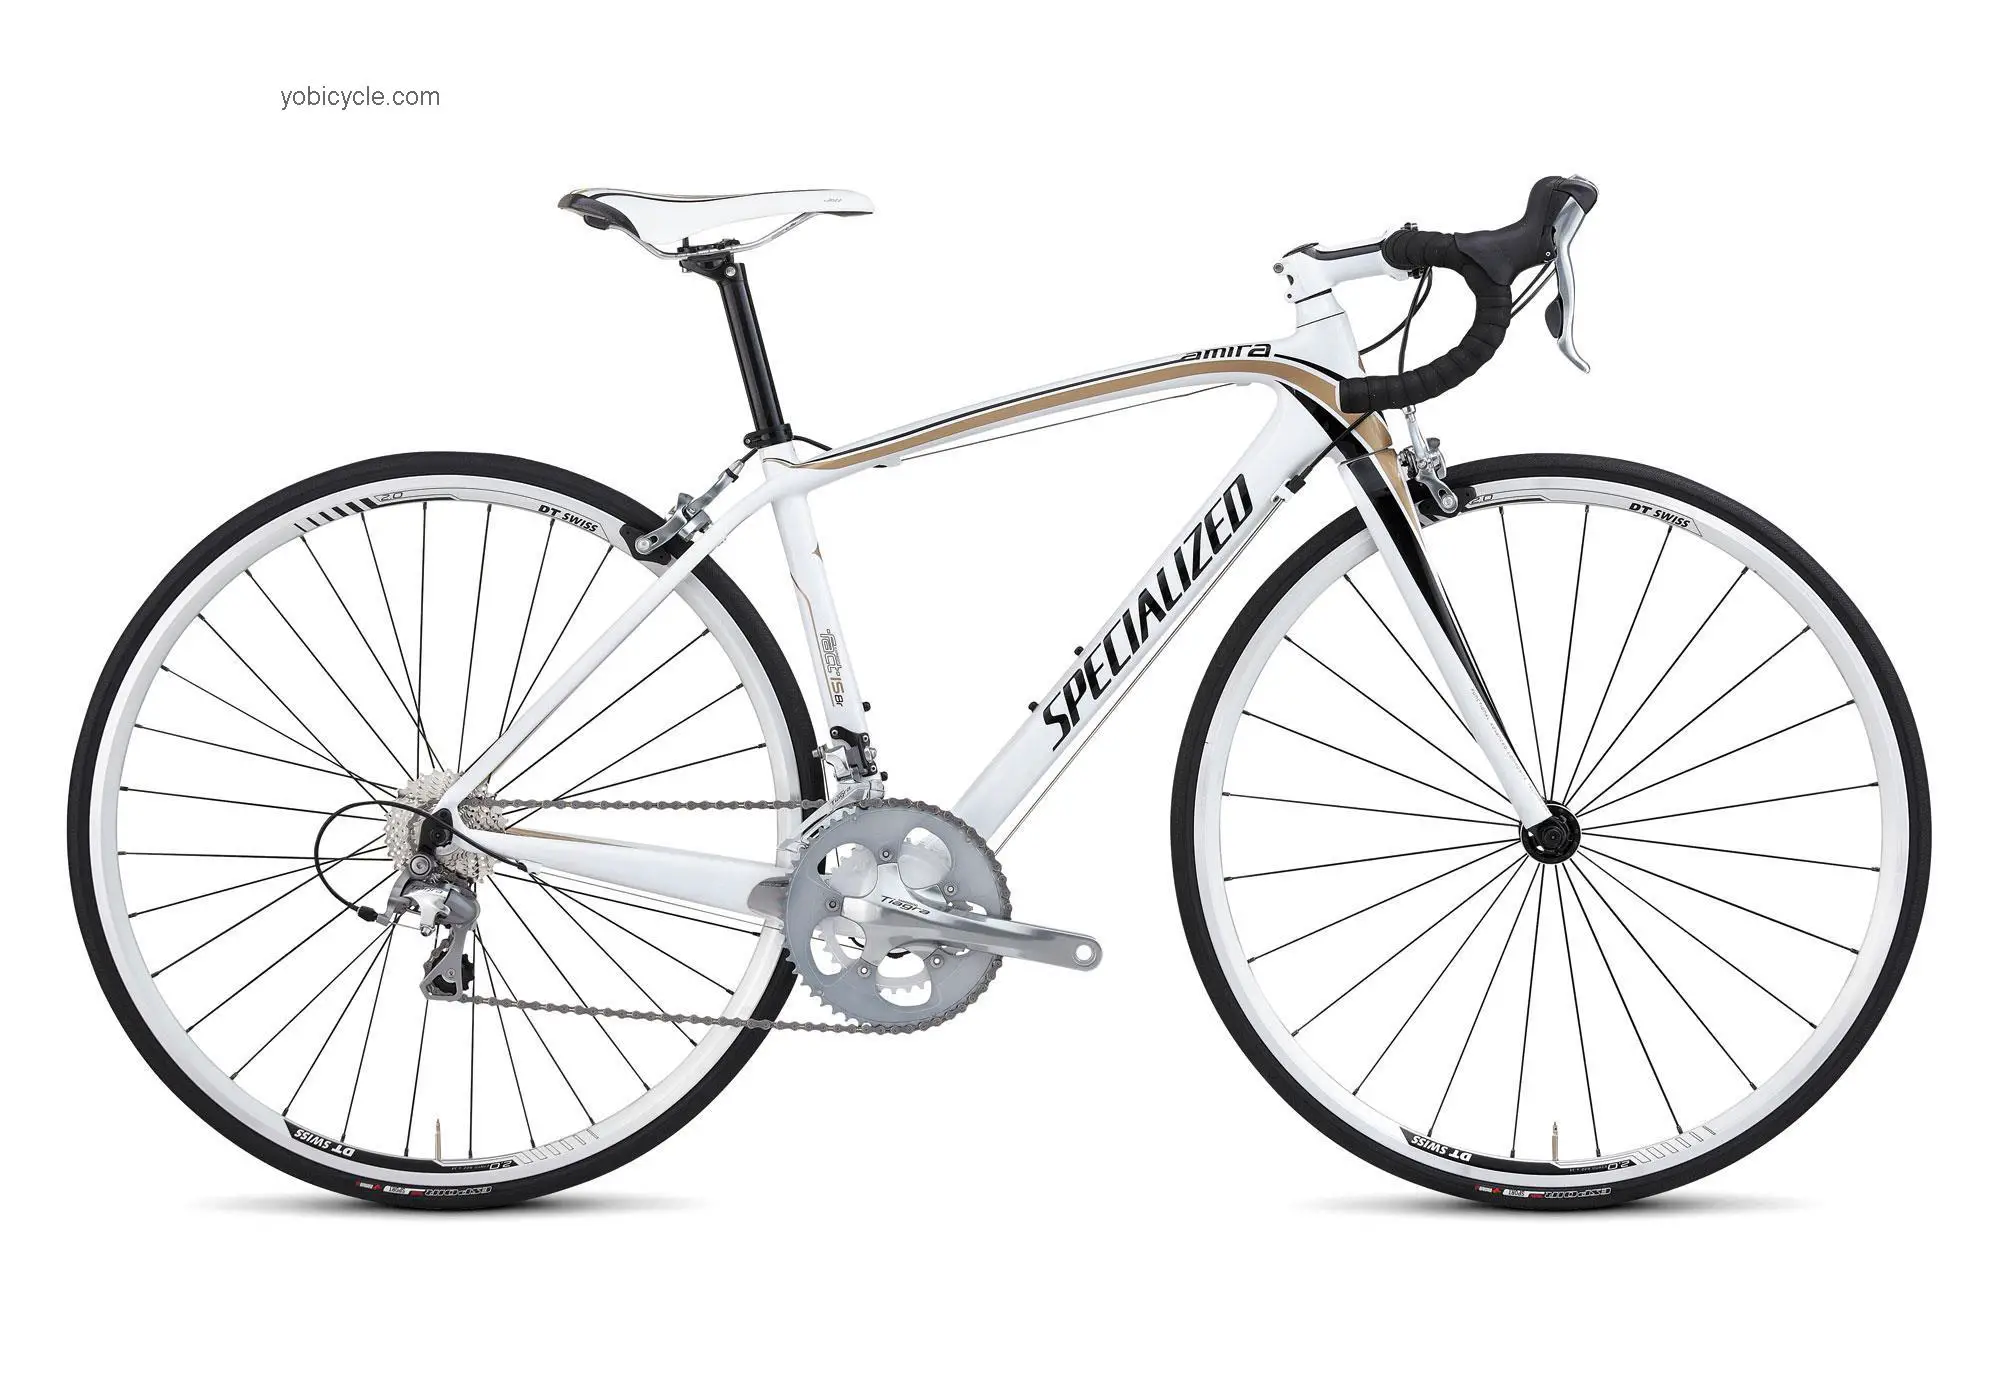 Specialized Amira Compact competitors and comparison tool online specs and performance